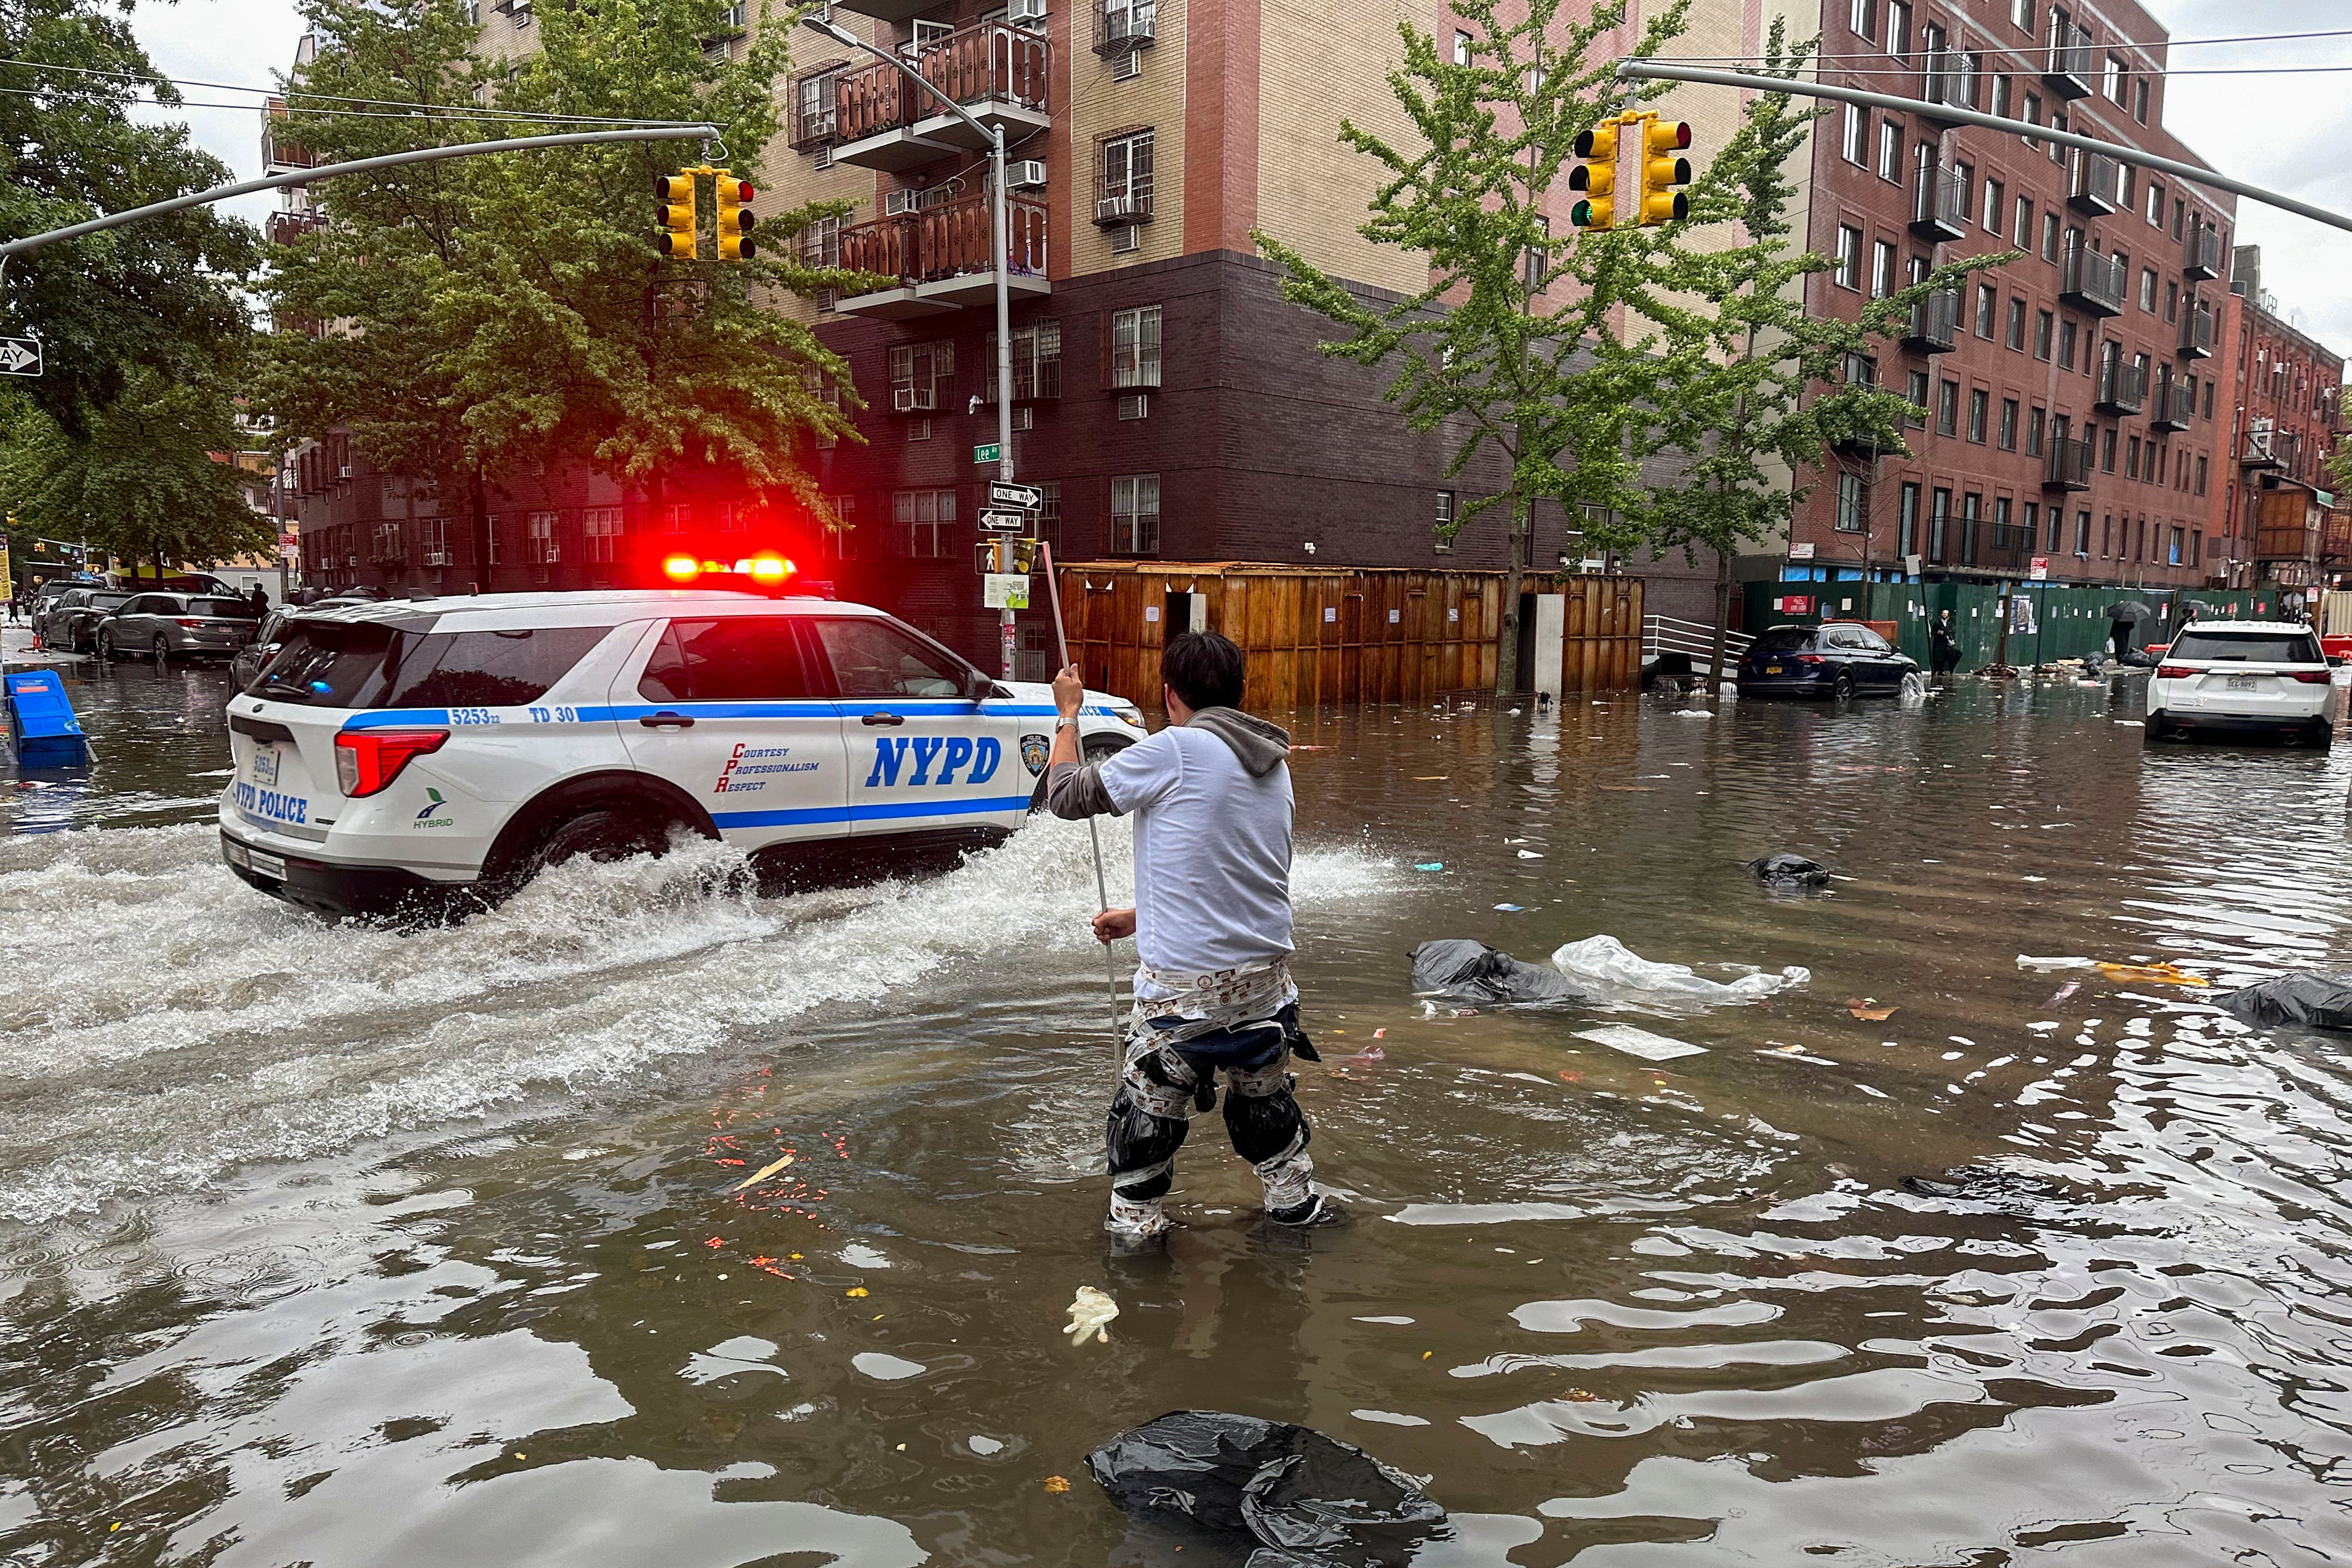 A man works to clear a drain in flood waters in Brooklyn on Friday. A potent rush-hour rainstorm swamped the New York metropolitan area